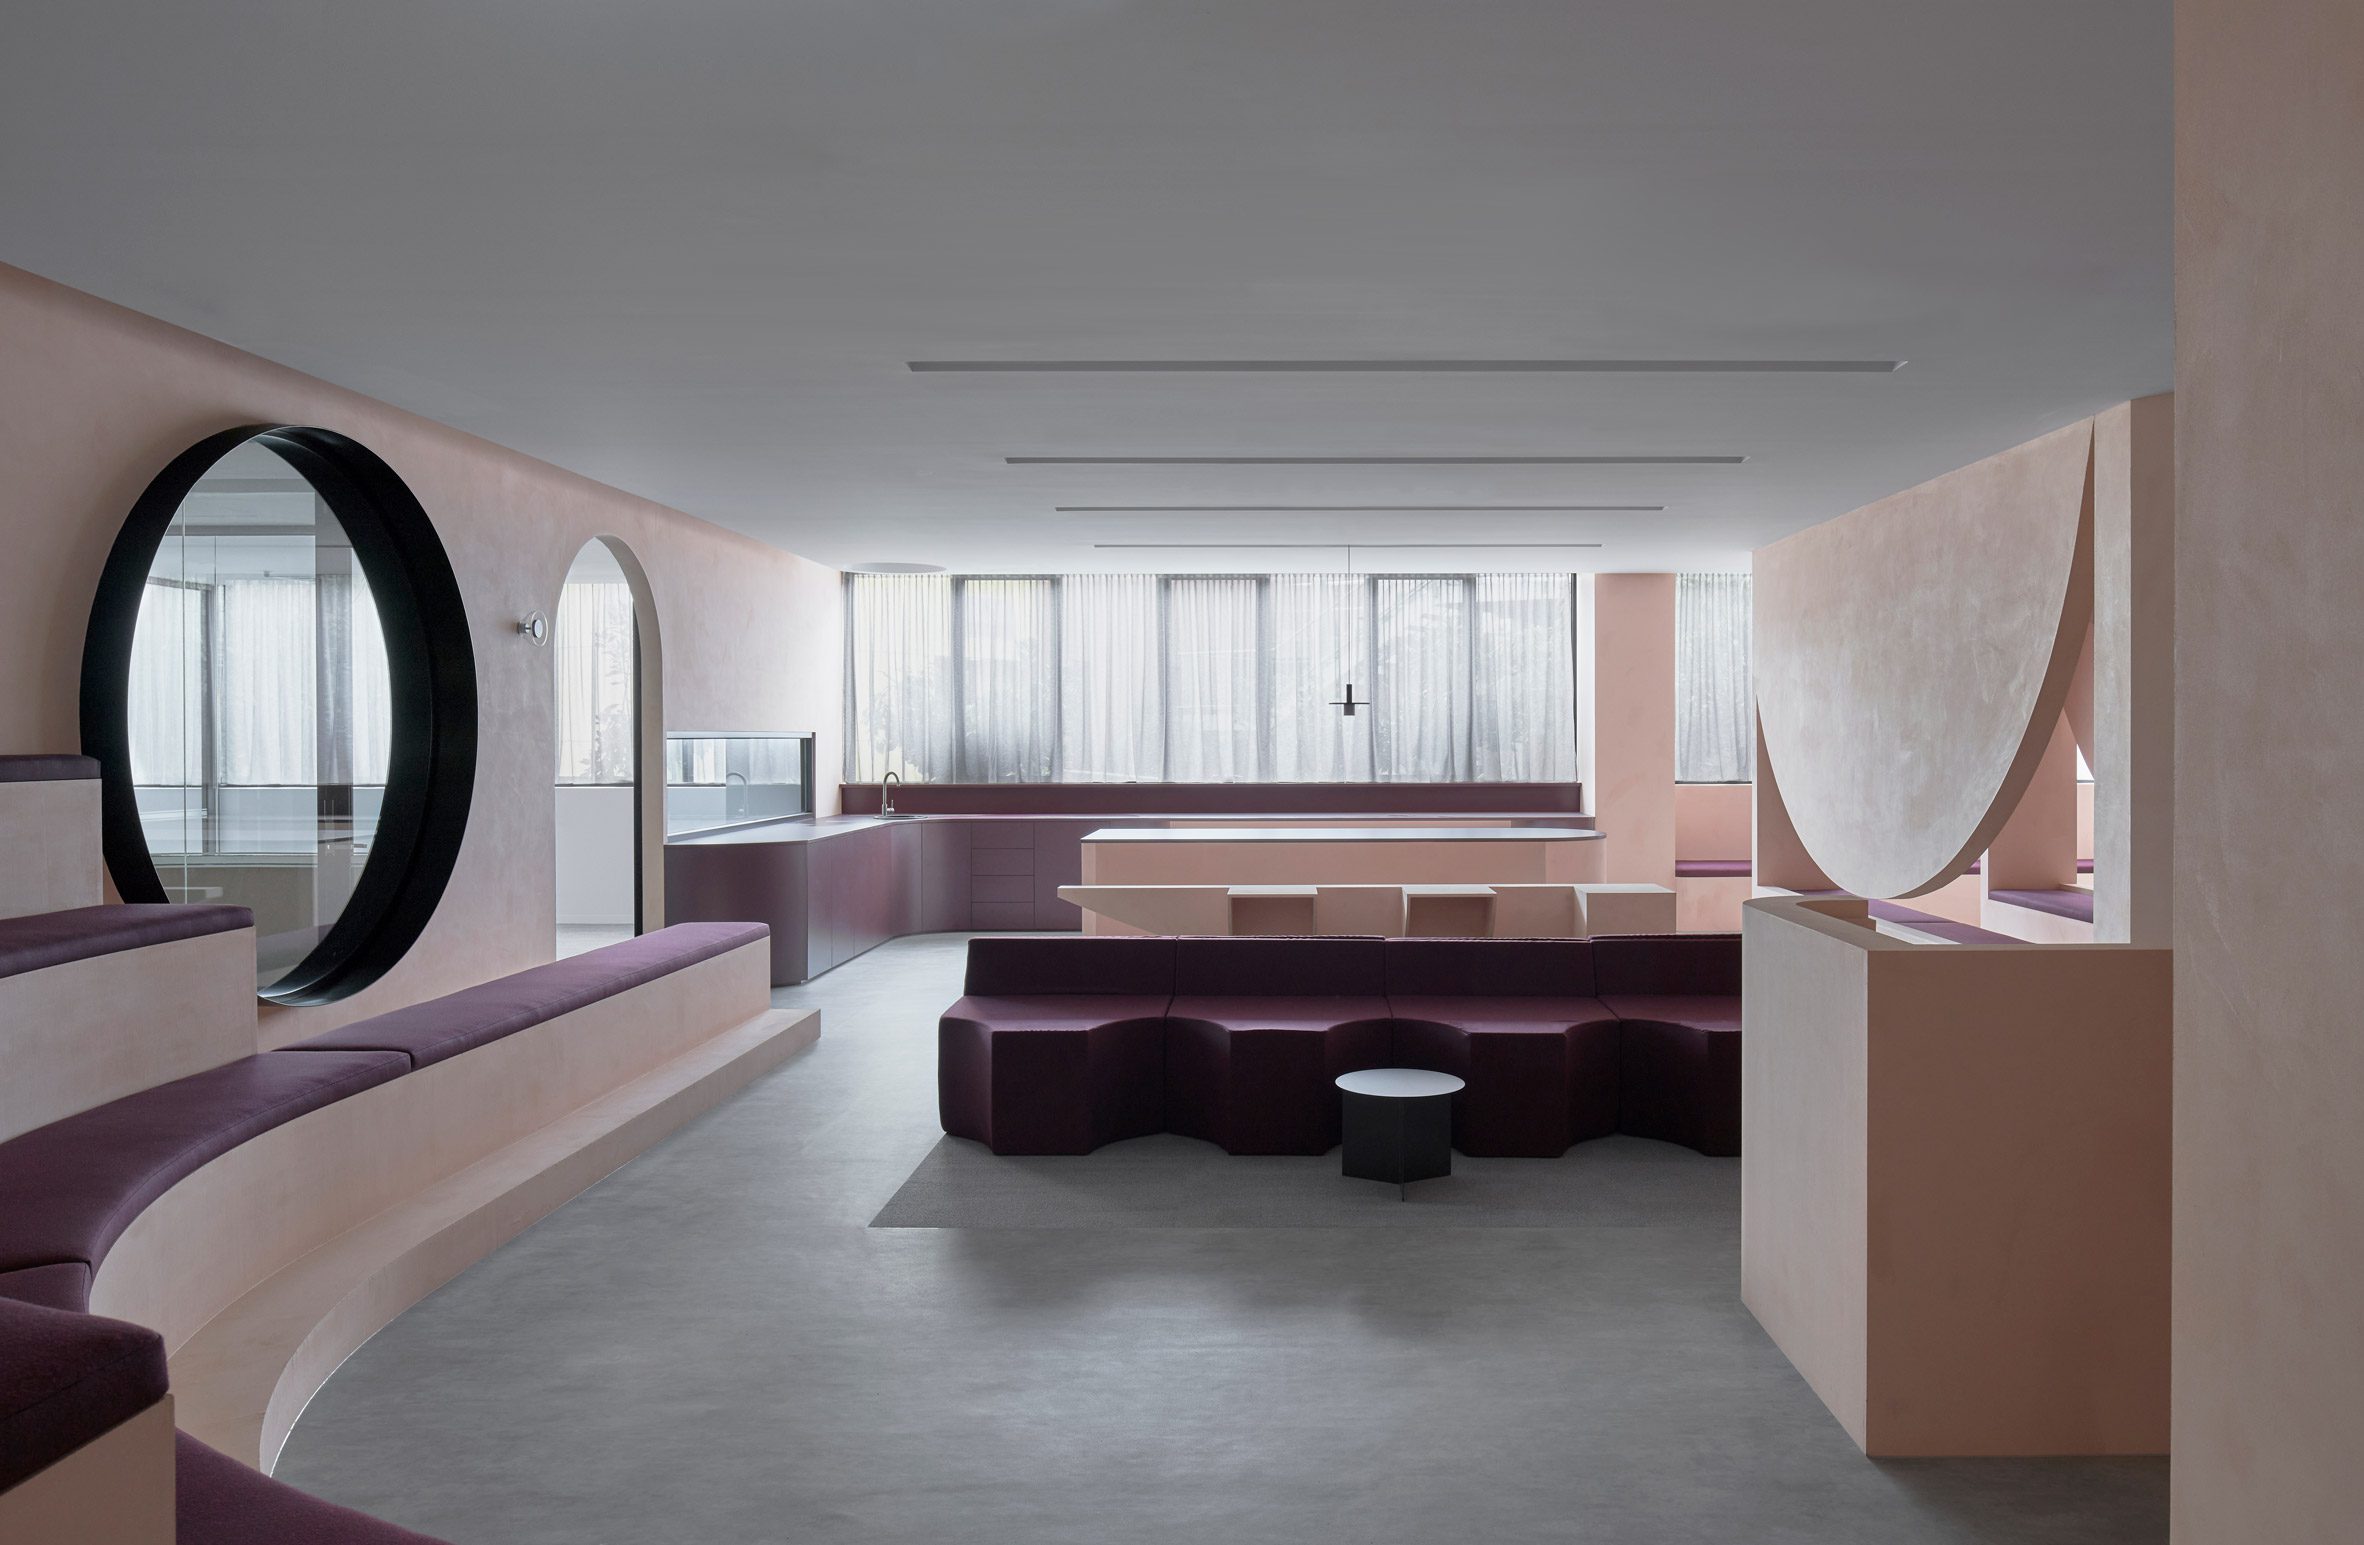 Student common area with pink plaster walls and purple seating